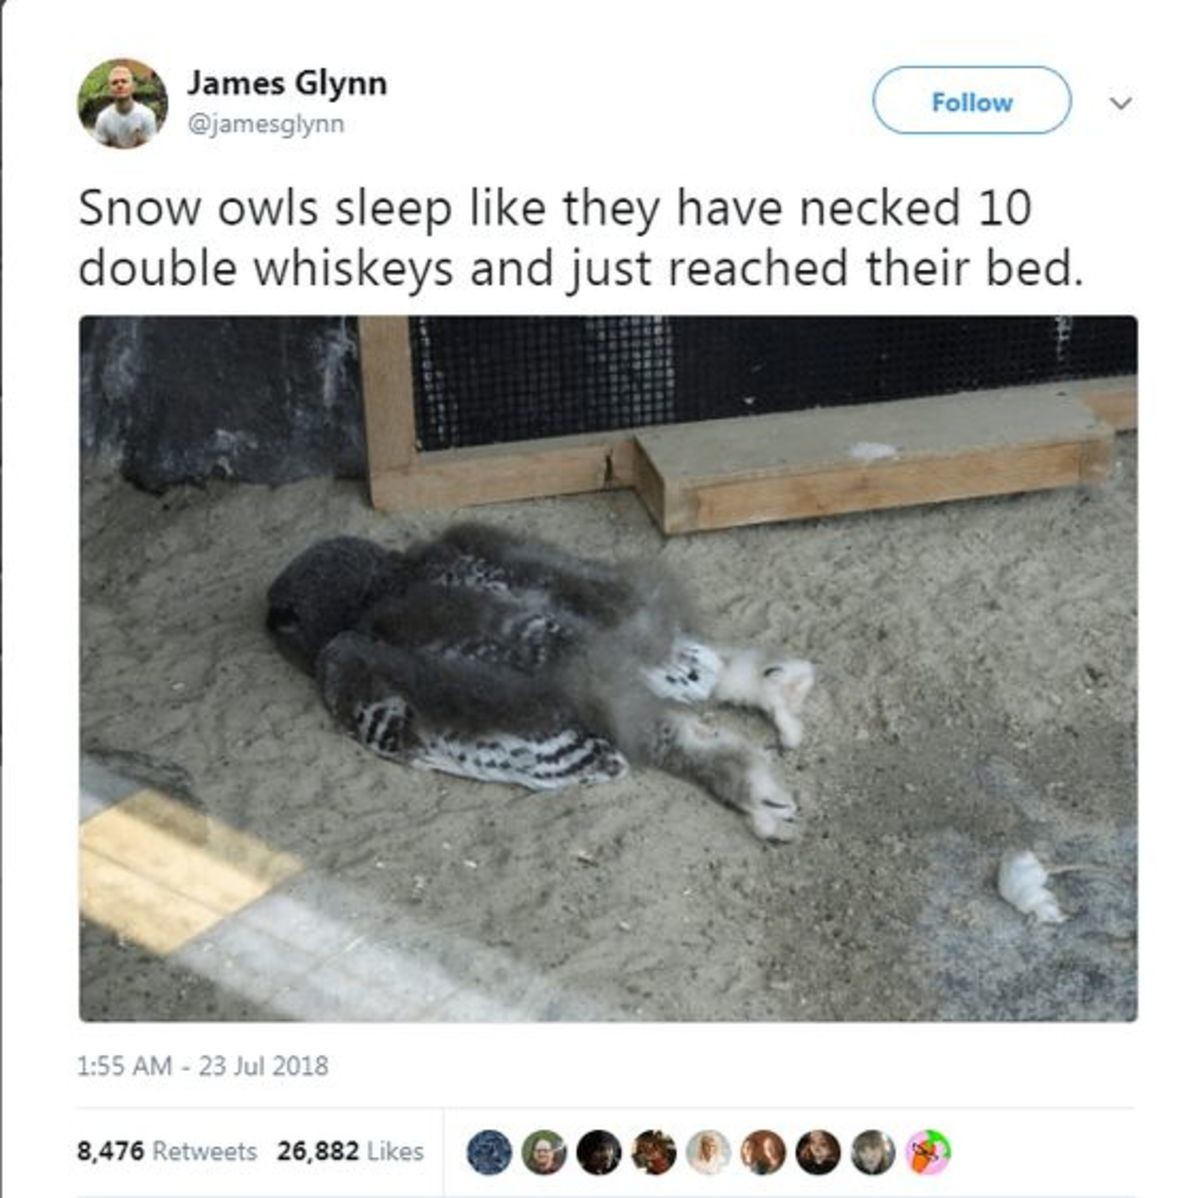 juvenile snowy owl sleeping face down - James Glynn Snow owls sleep they have necked 10 double whiskeys and just reached their bed. 8,476 26,882 8,476 26,882 00.000